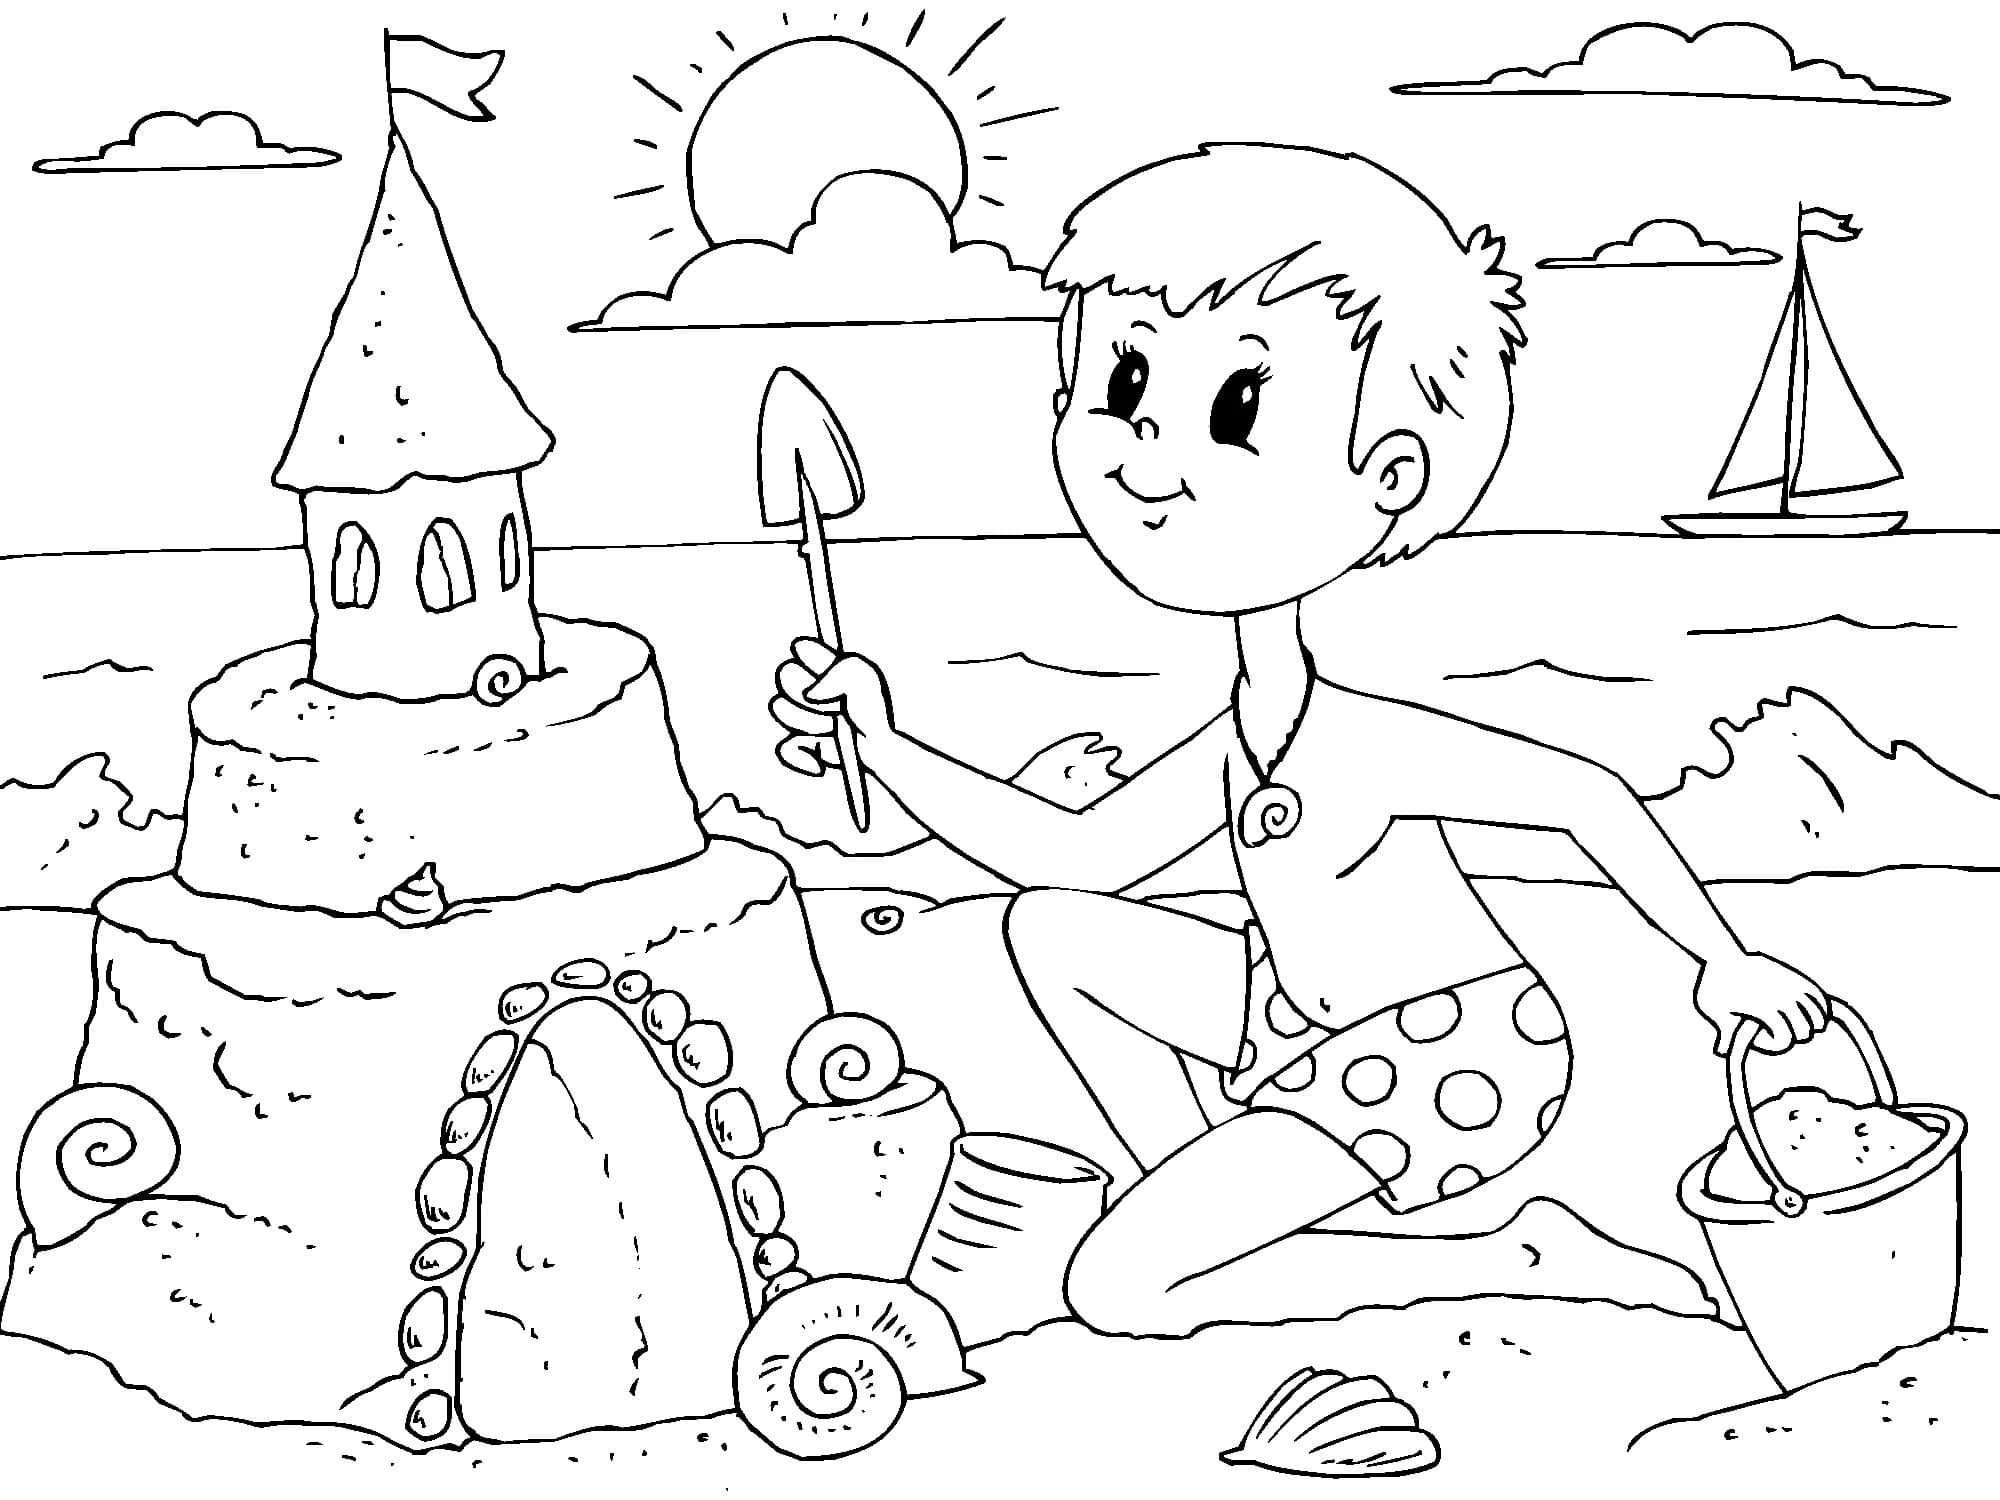 Summer Coloring Pages